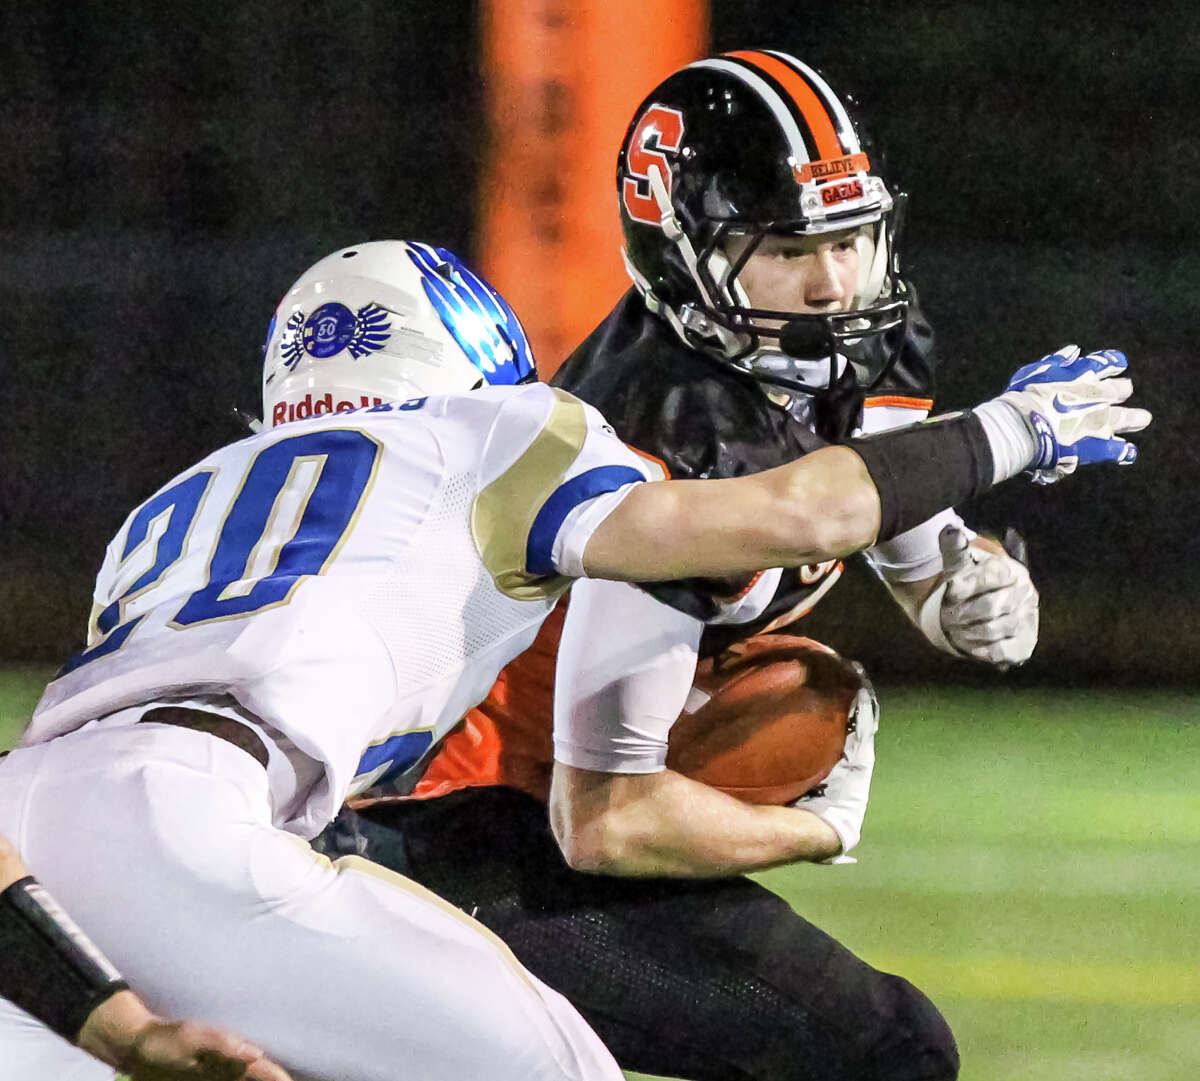 Shelton receiver Kevin Robinson slips out of the tackle by Newton’s Michael Doyle during Shelton’s 35-28 win over Newtown Monday in the Class LL semifinals